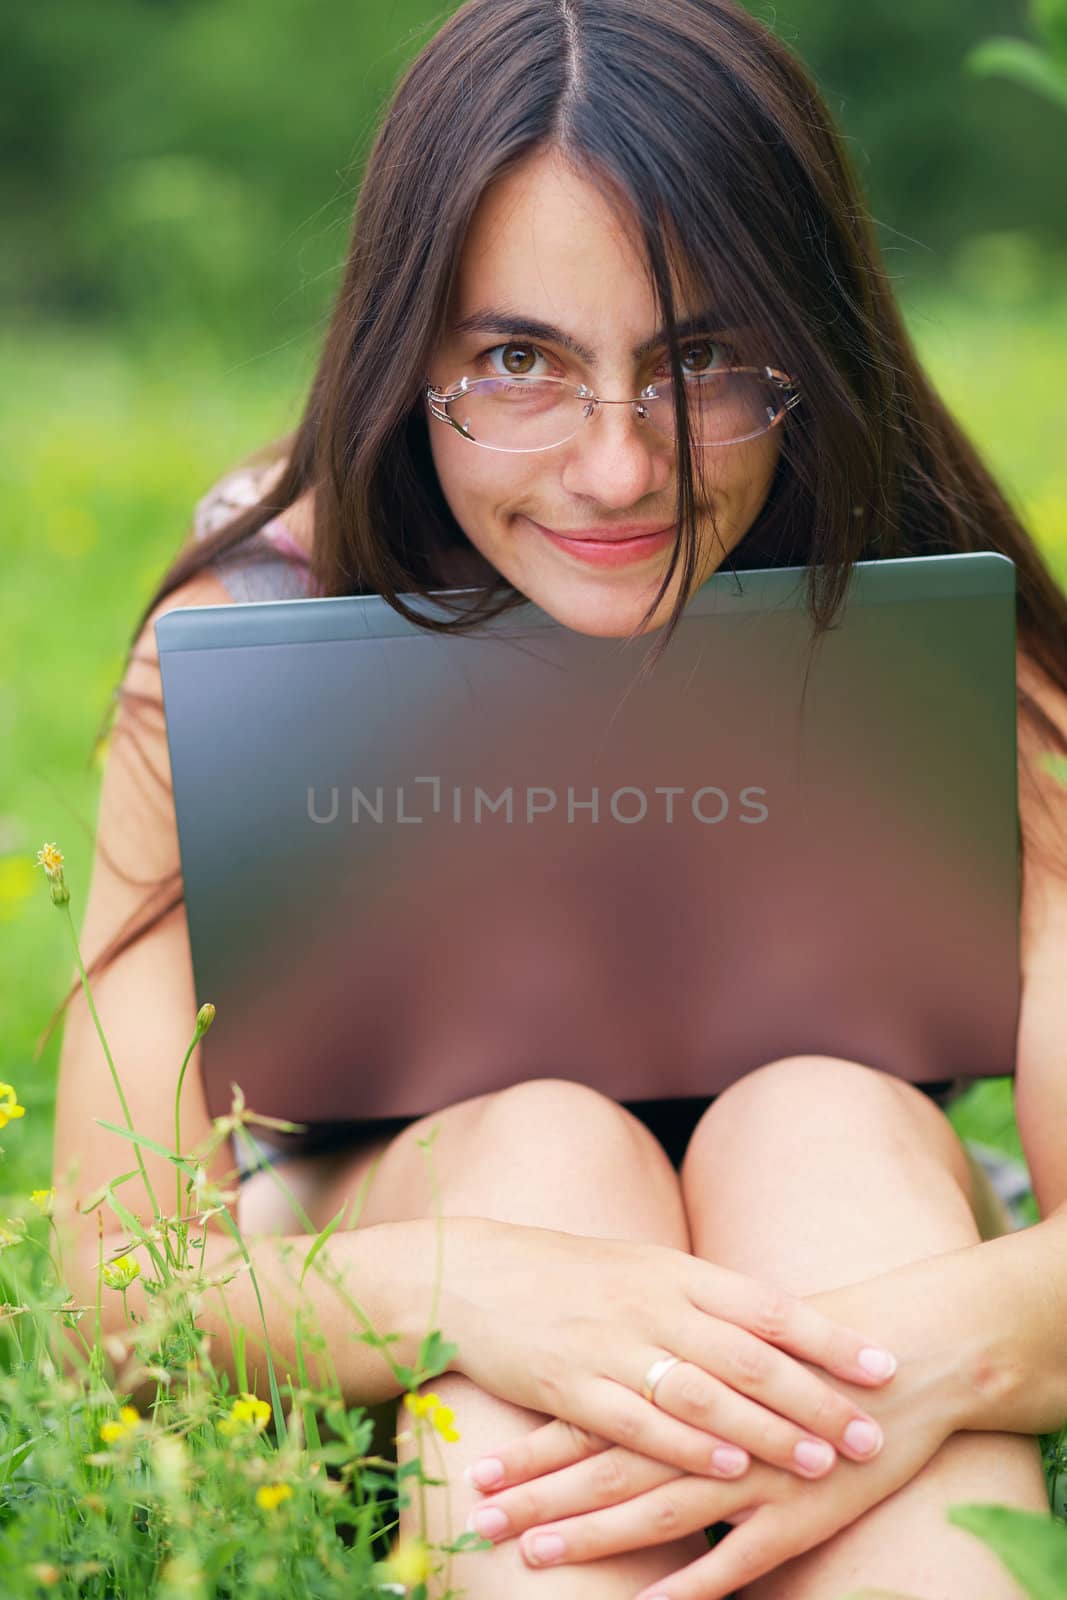 Close-up portrait of a happy woman with laptop outdoors